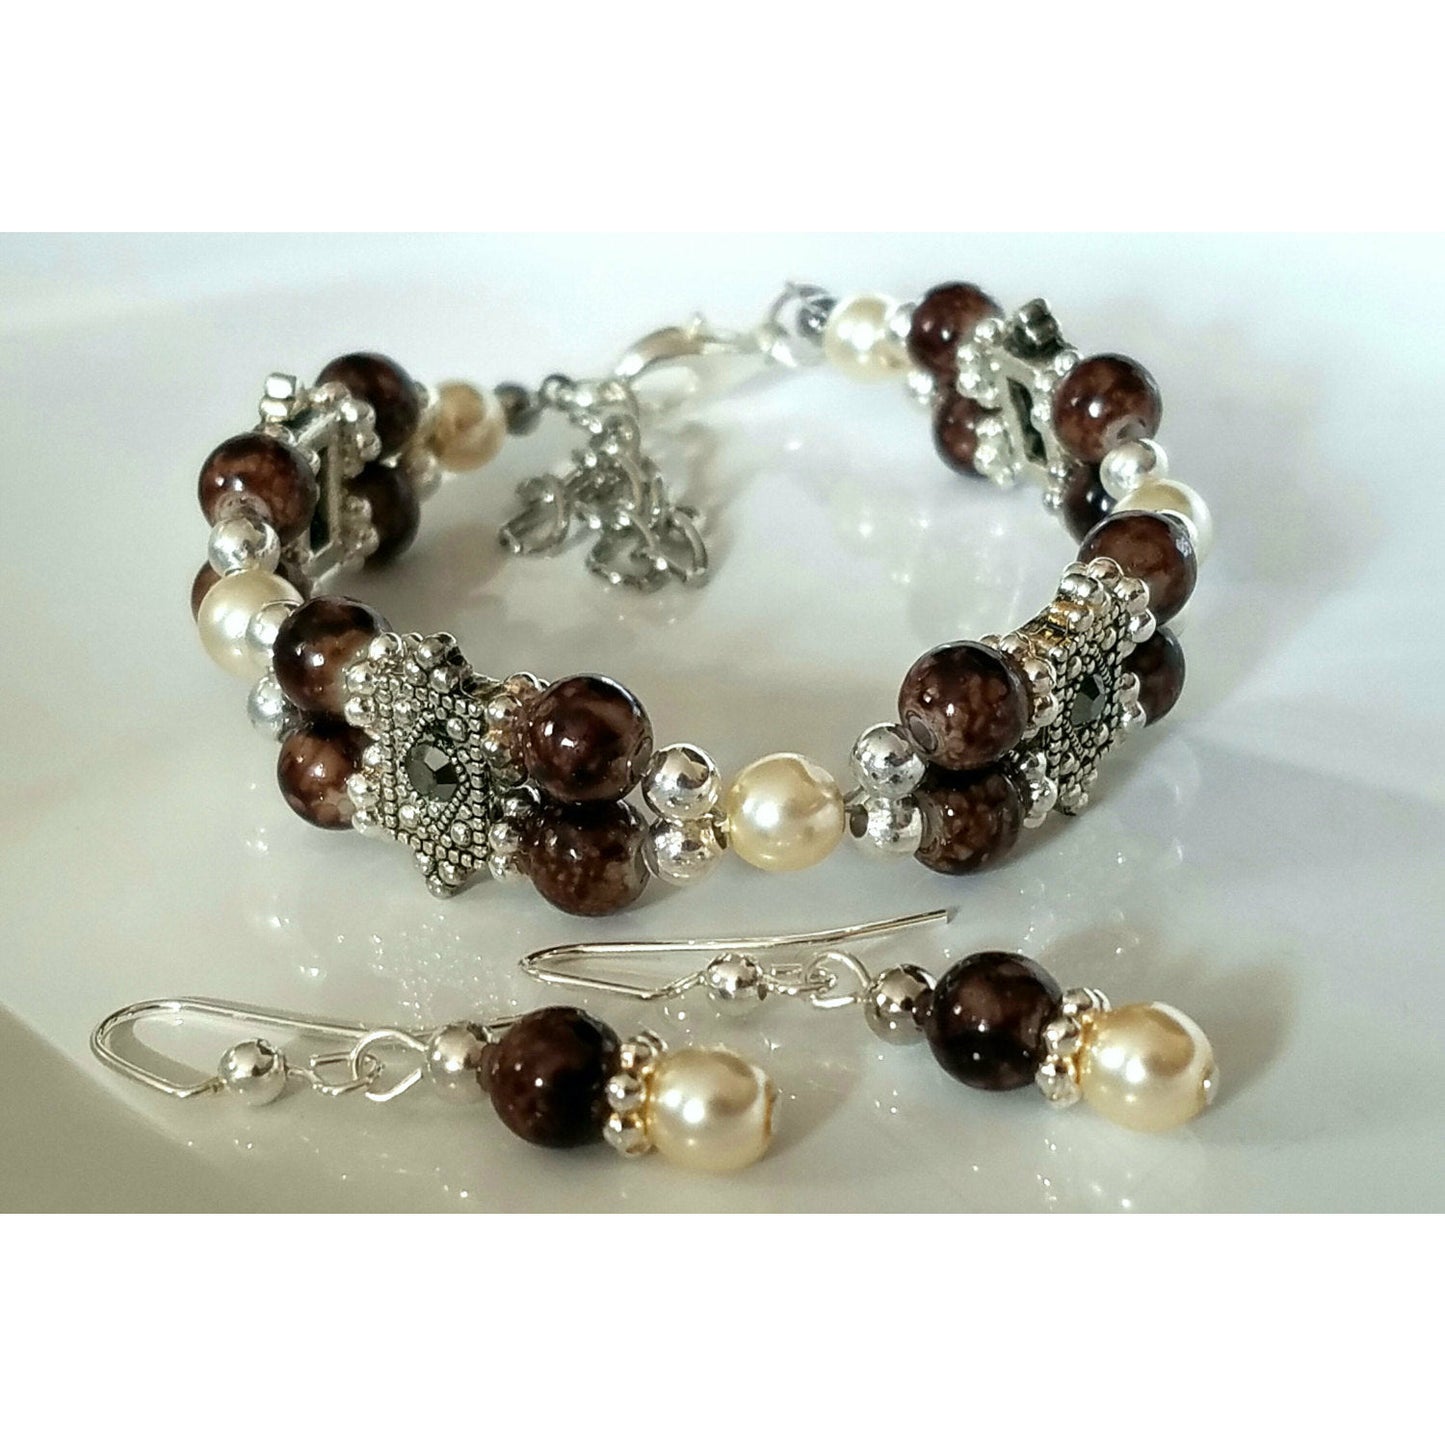 Chocolate Moss Vintage style bracelet and matching earrings